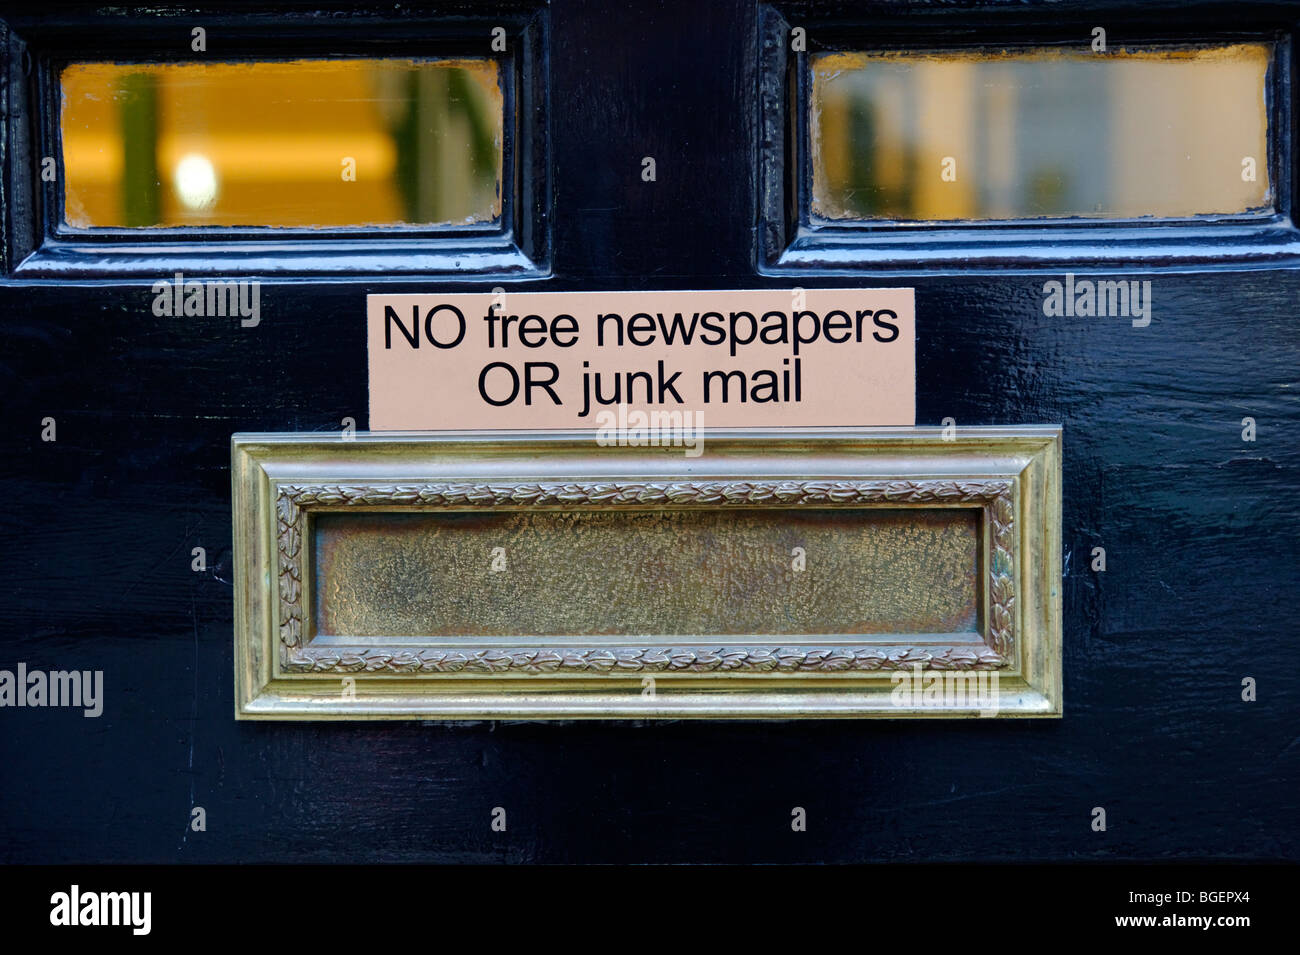 Front door residential letterbox 'No free newspapers or junk mail'. London. UK 2009 Stock Photo